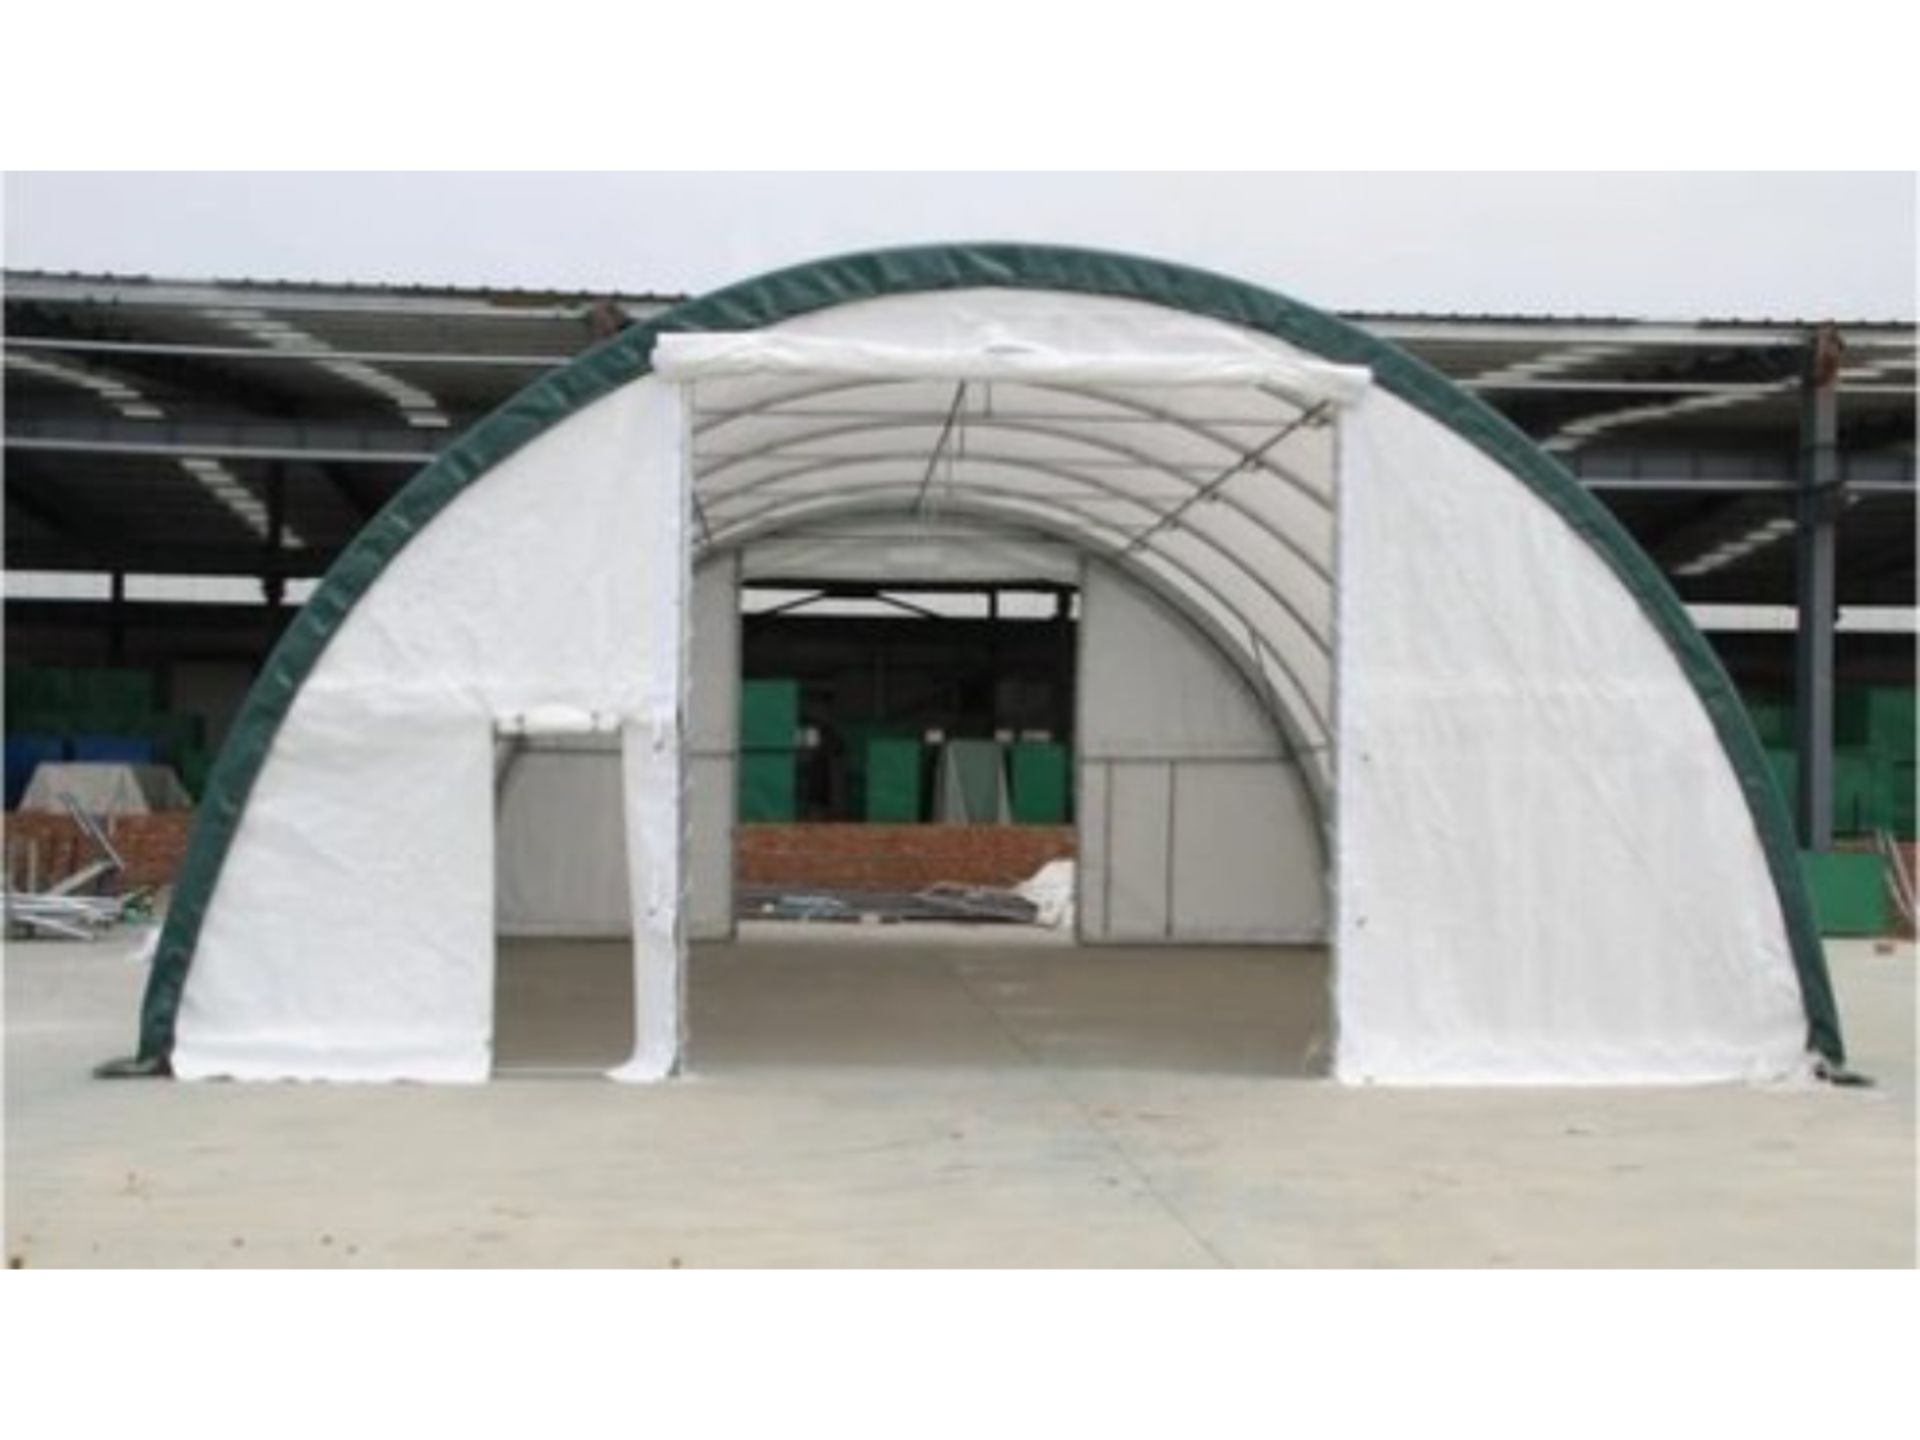 30' x 40' x 15 Dome Shelter - Image 7 of 8